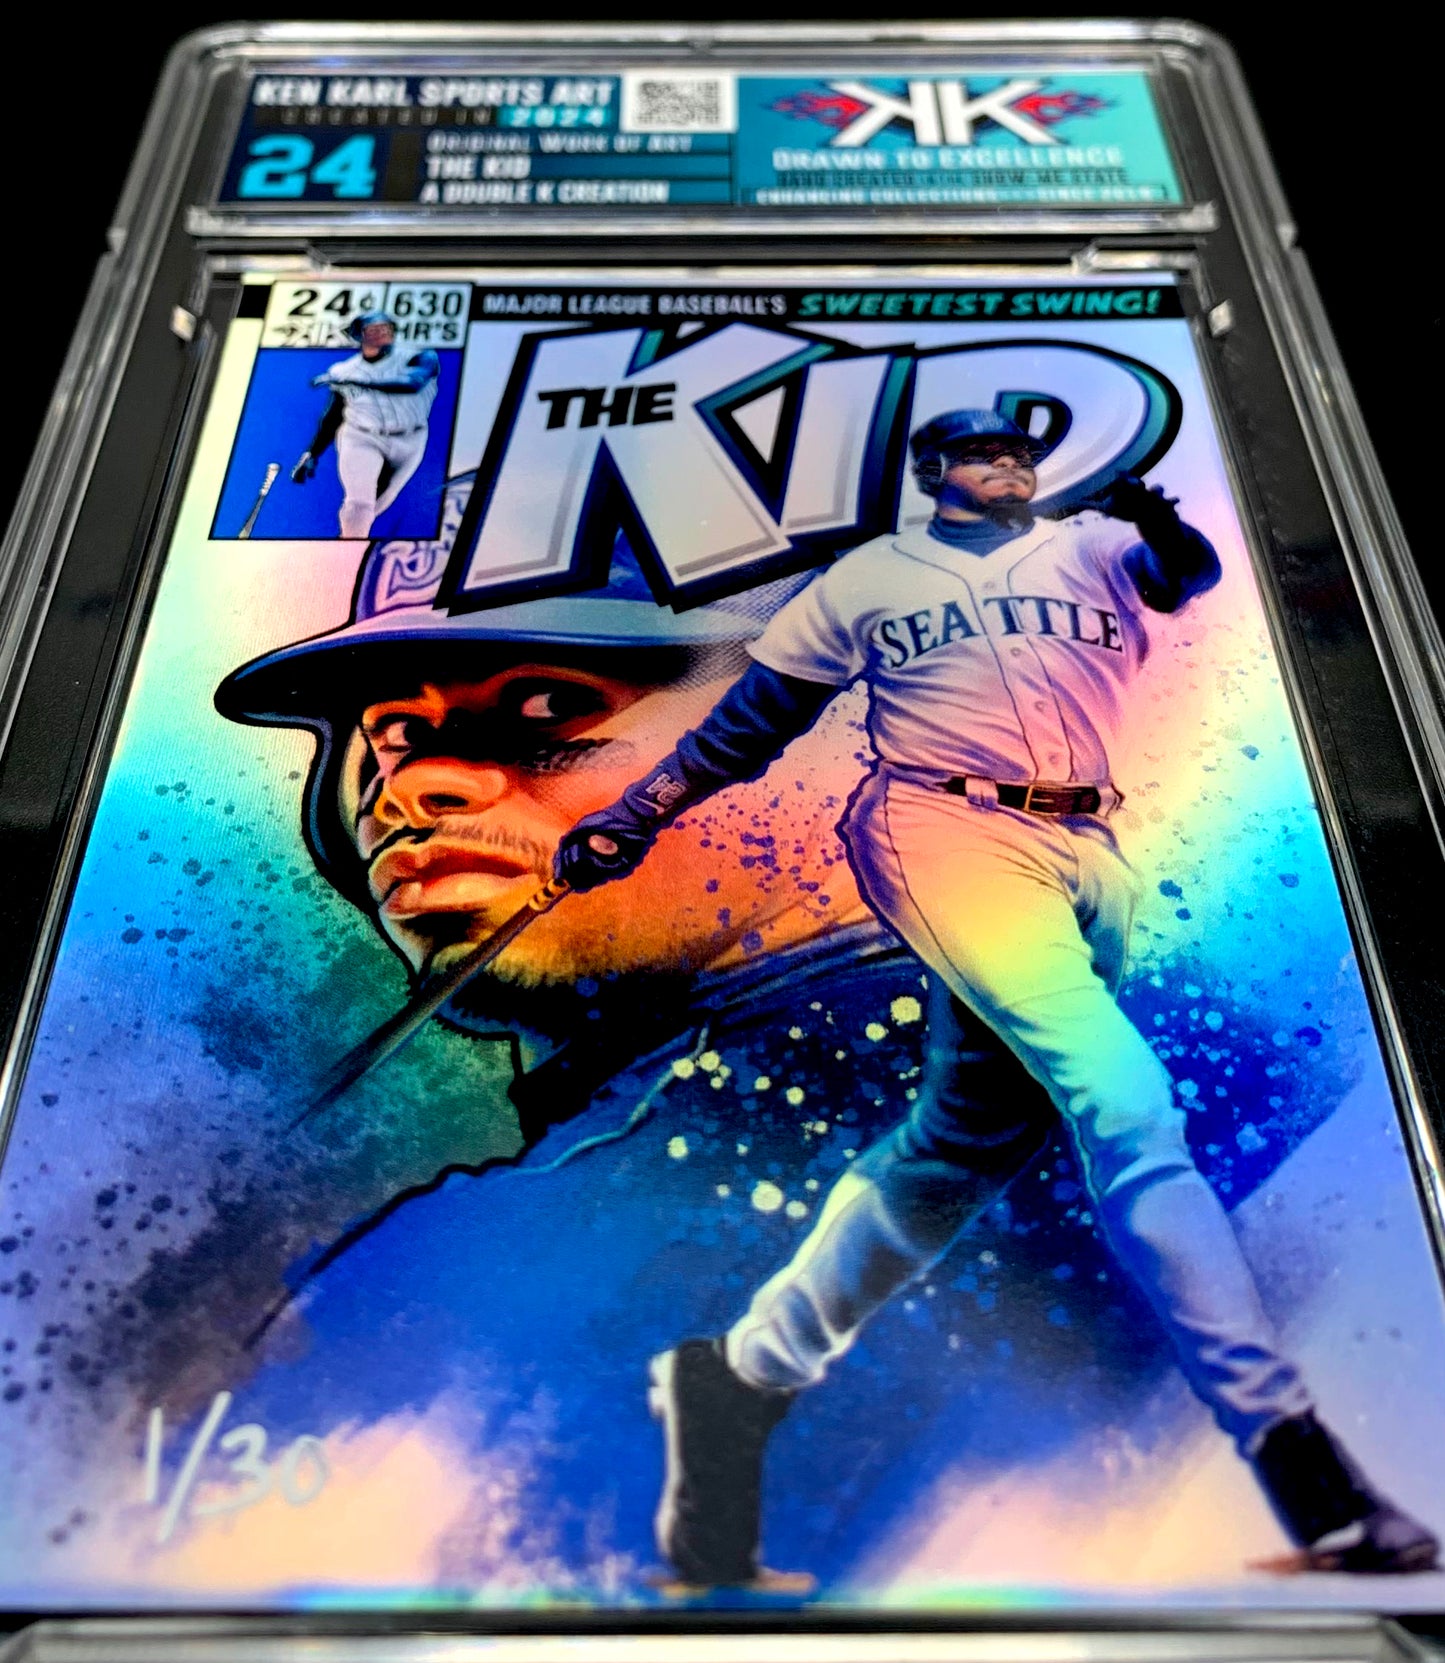 Ken Griffey Jr. Comic book cover limited edition cards